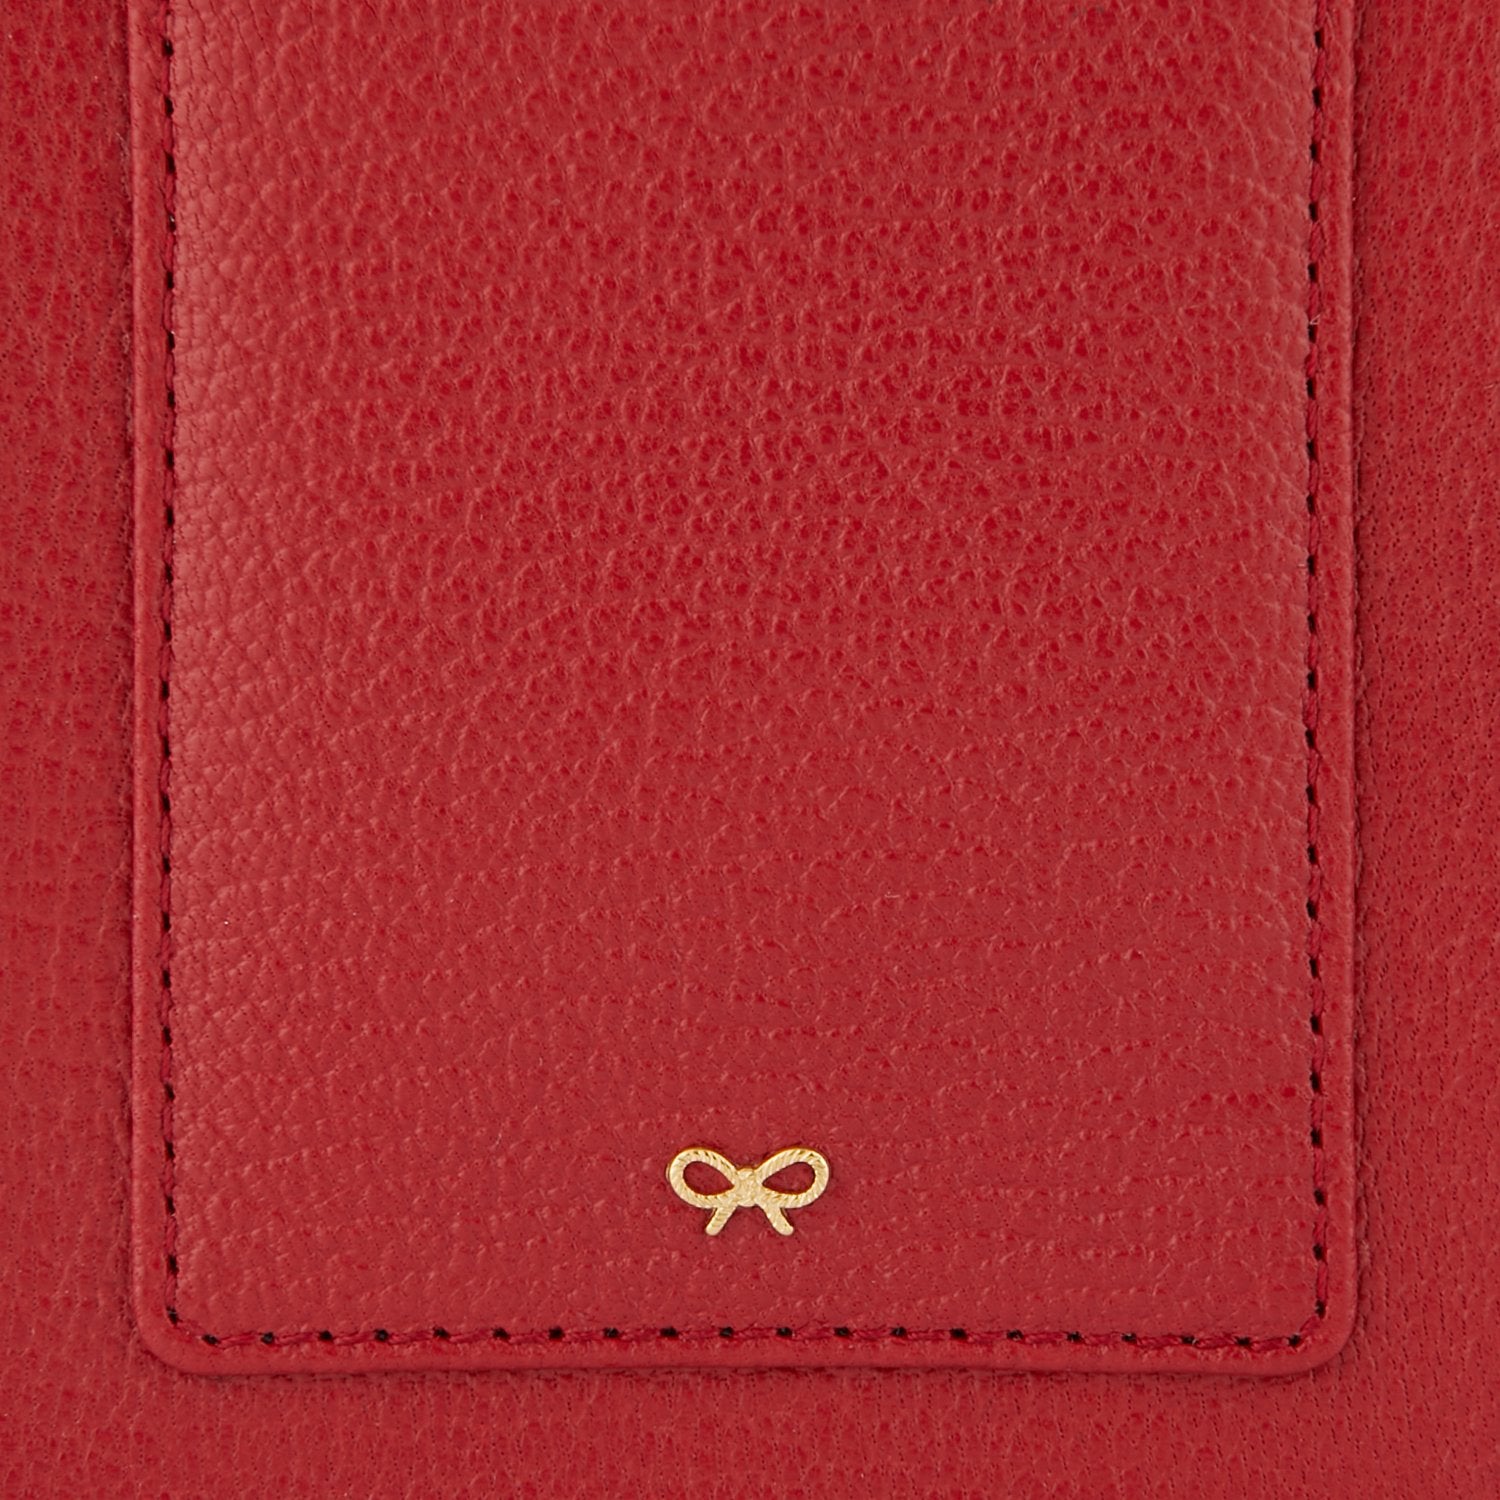 Bespoke Phone Pouch on Strap -

                  
                    Capra in Red -
                  

                  Anya Hindmarch US
